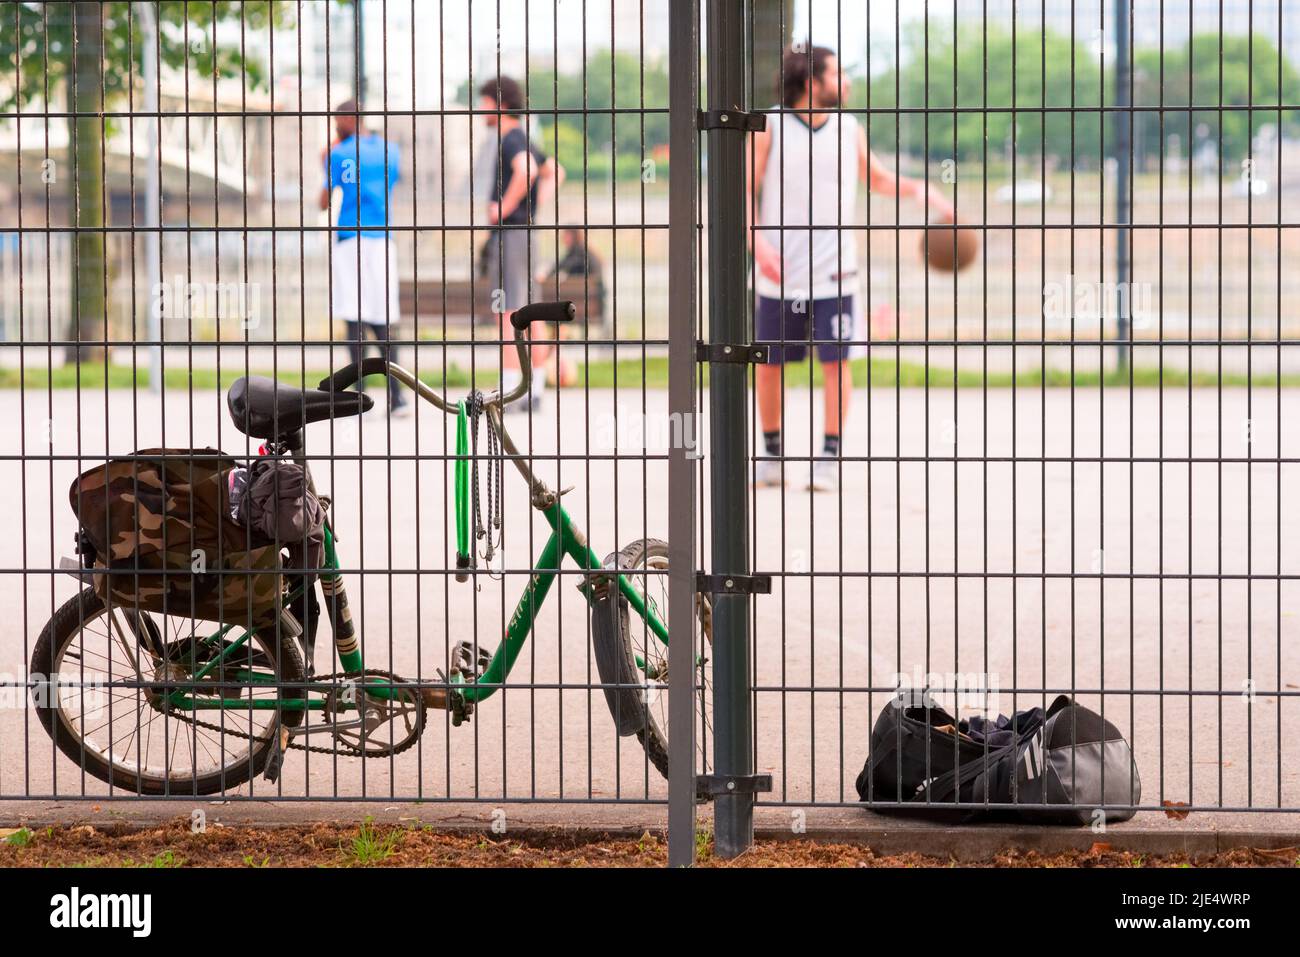 Sports ground, bicycle against men playing basketball Stock Photo